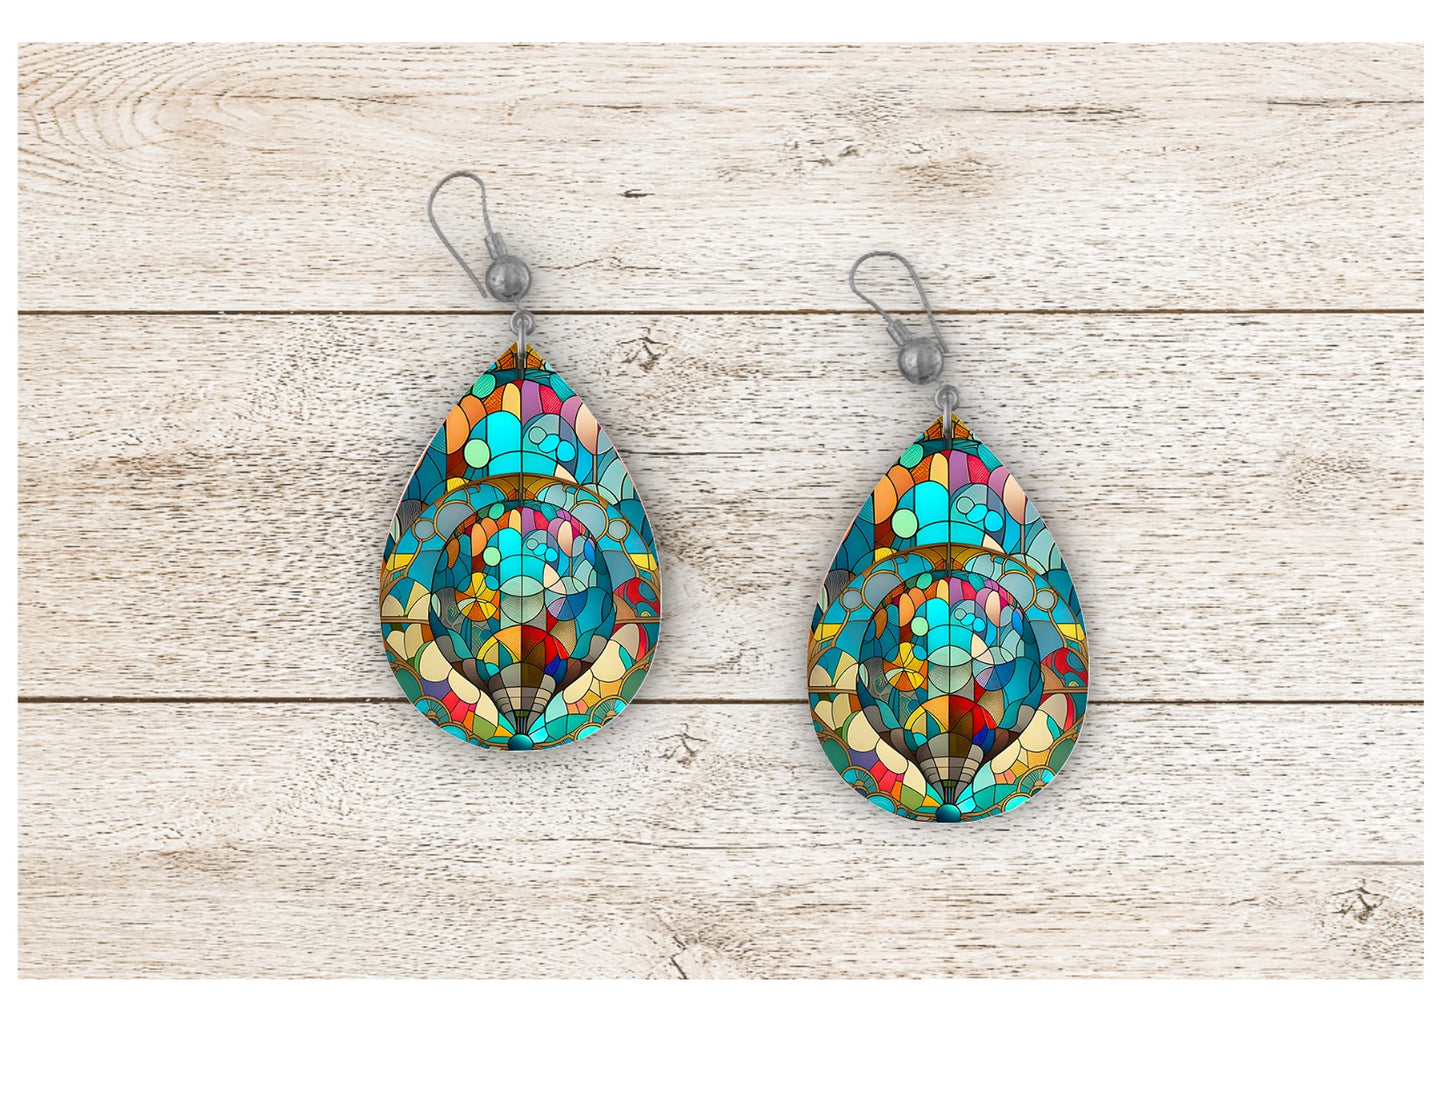 Balloon Stained Glass Earrings